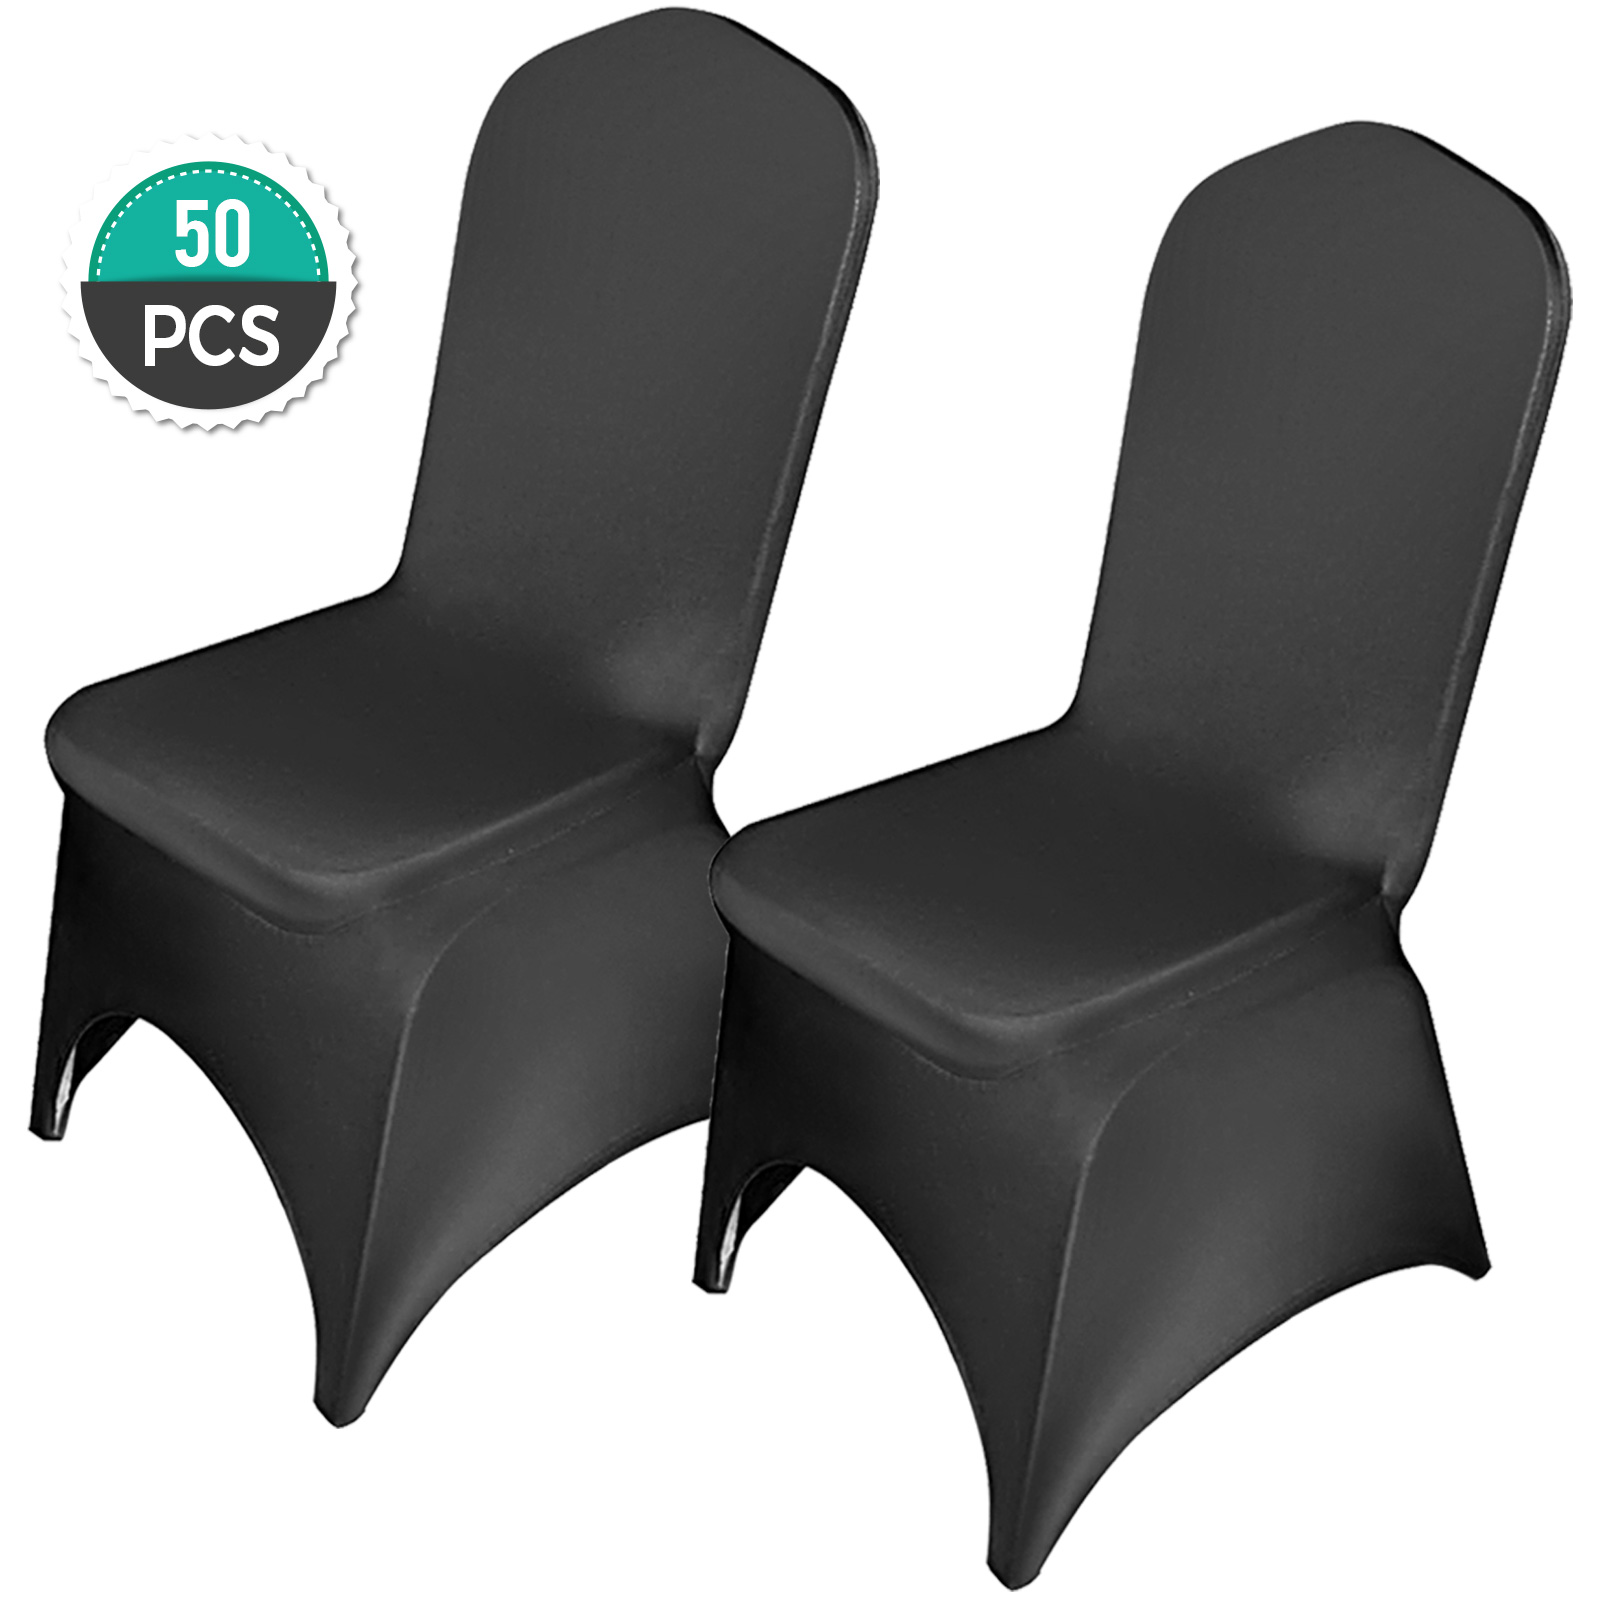 Details about   Meeting Chair Cover Protect 3pcs/set Polyester+Spandex Back Replacement 